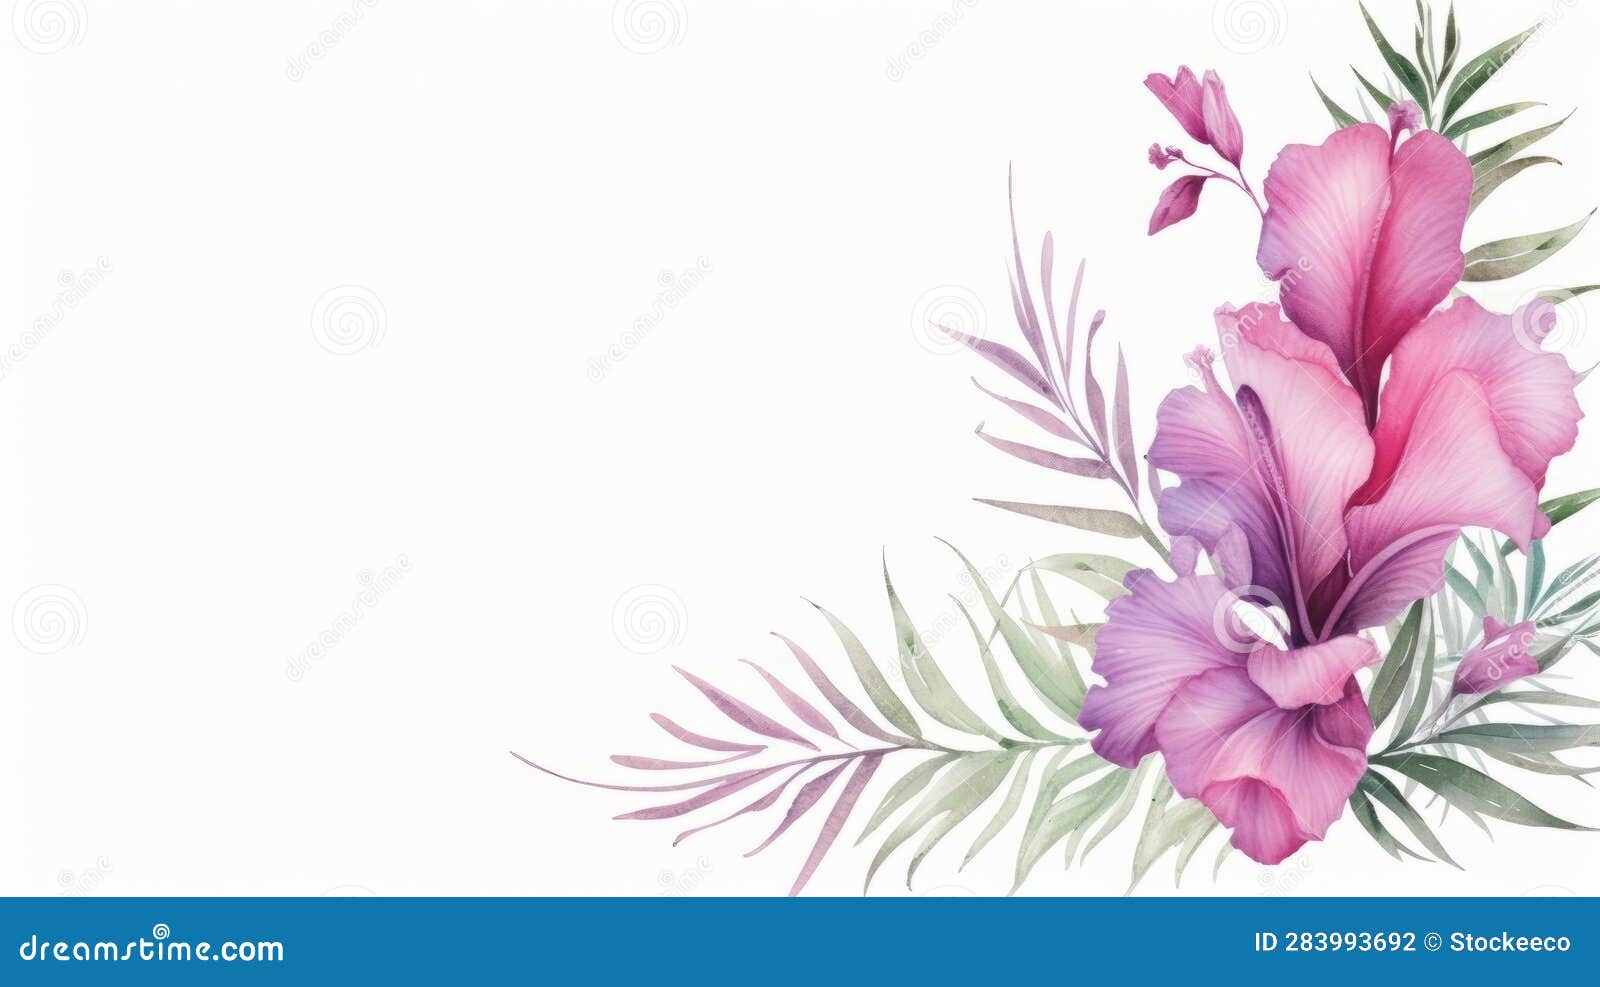 floral border with purple irises and leaves 